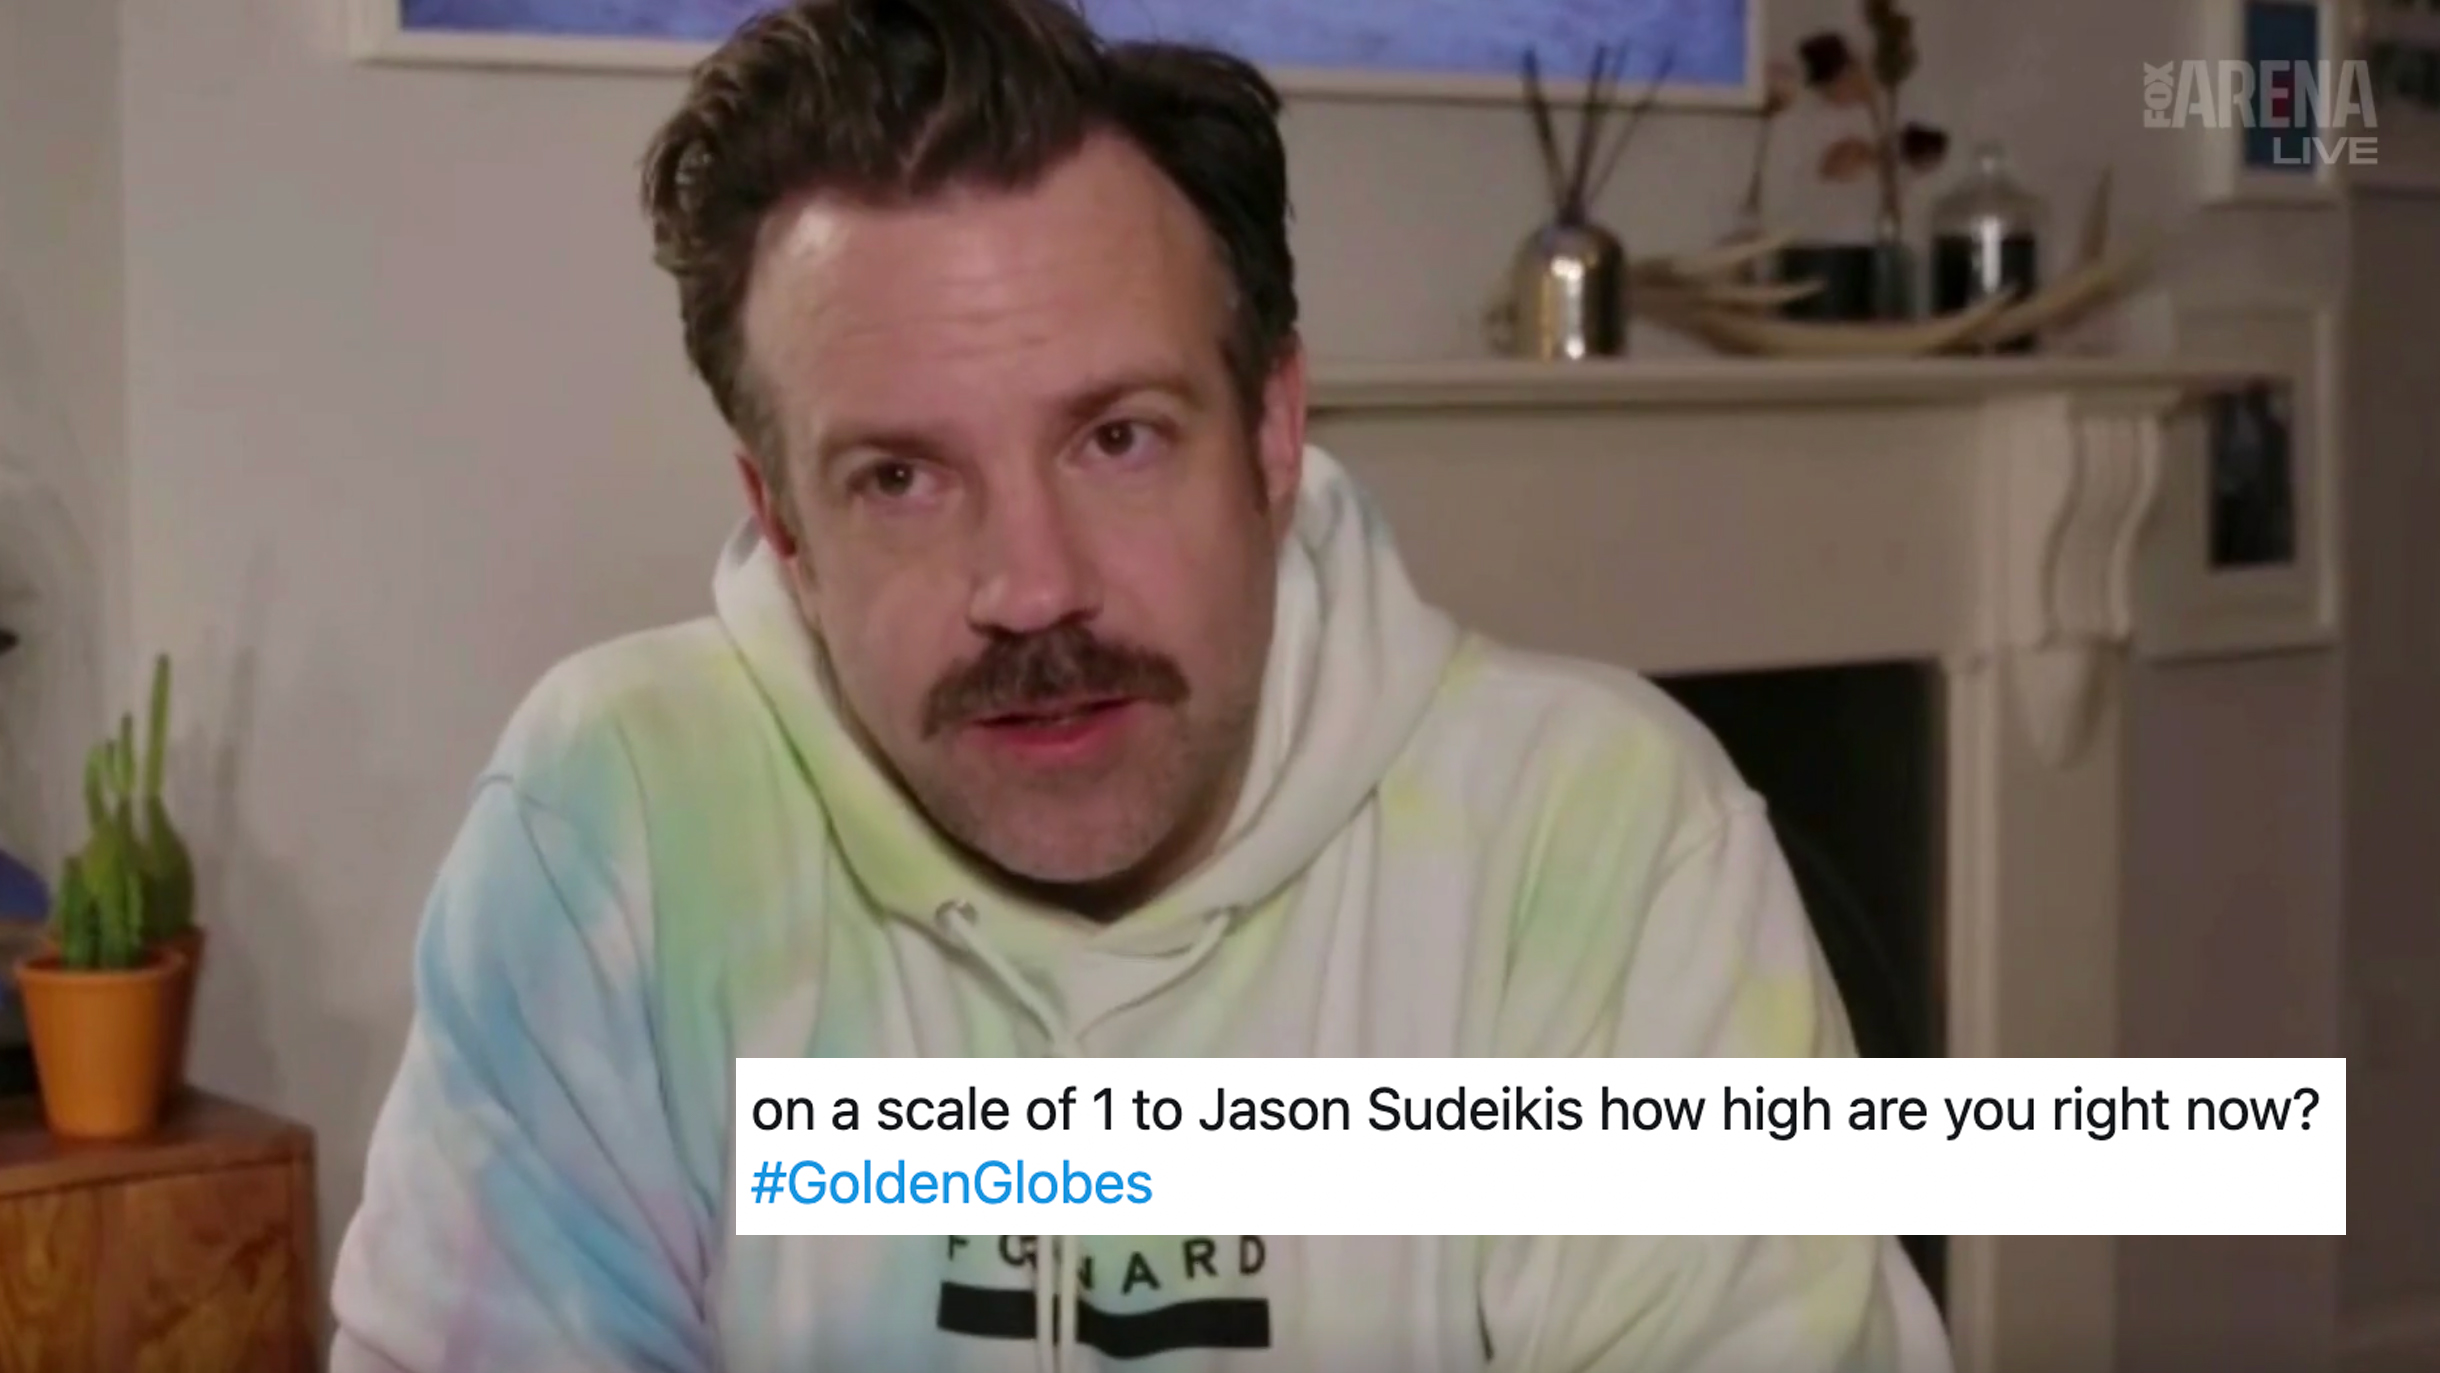 Jason Sudeikis Wore A Fkn Hoodie To The Golden Globes, So Clearly He’s Taking The Breakup Fine